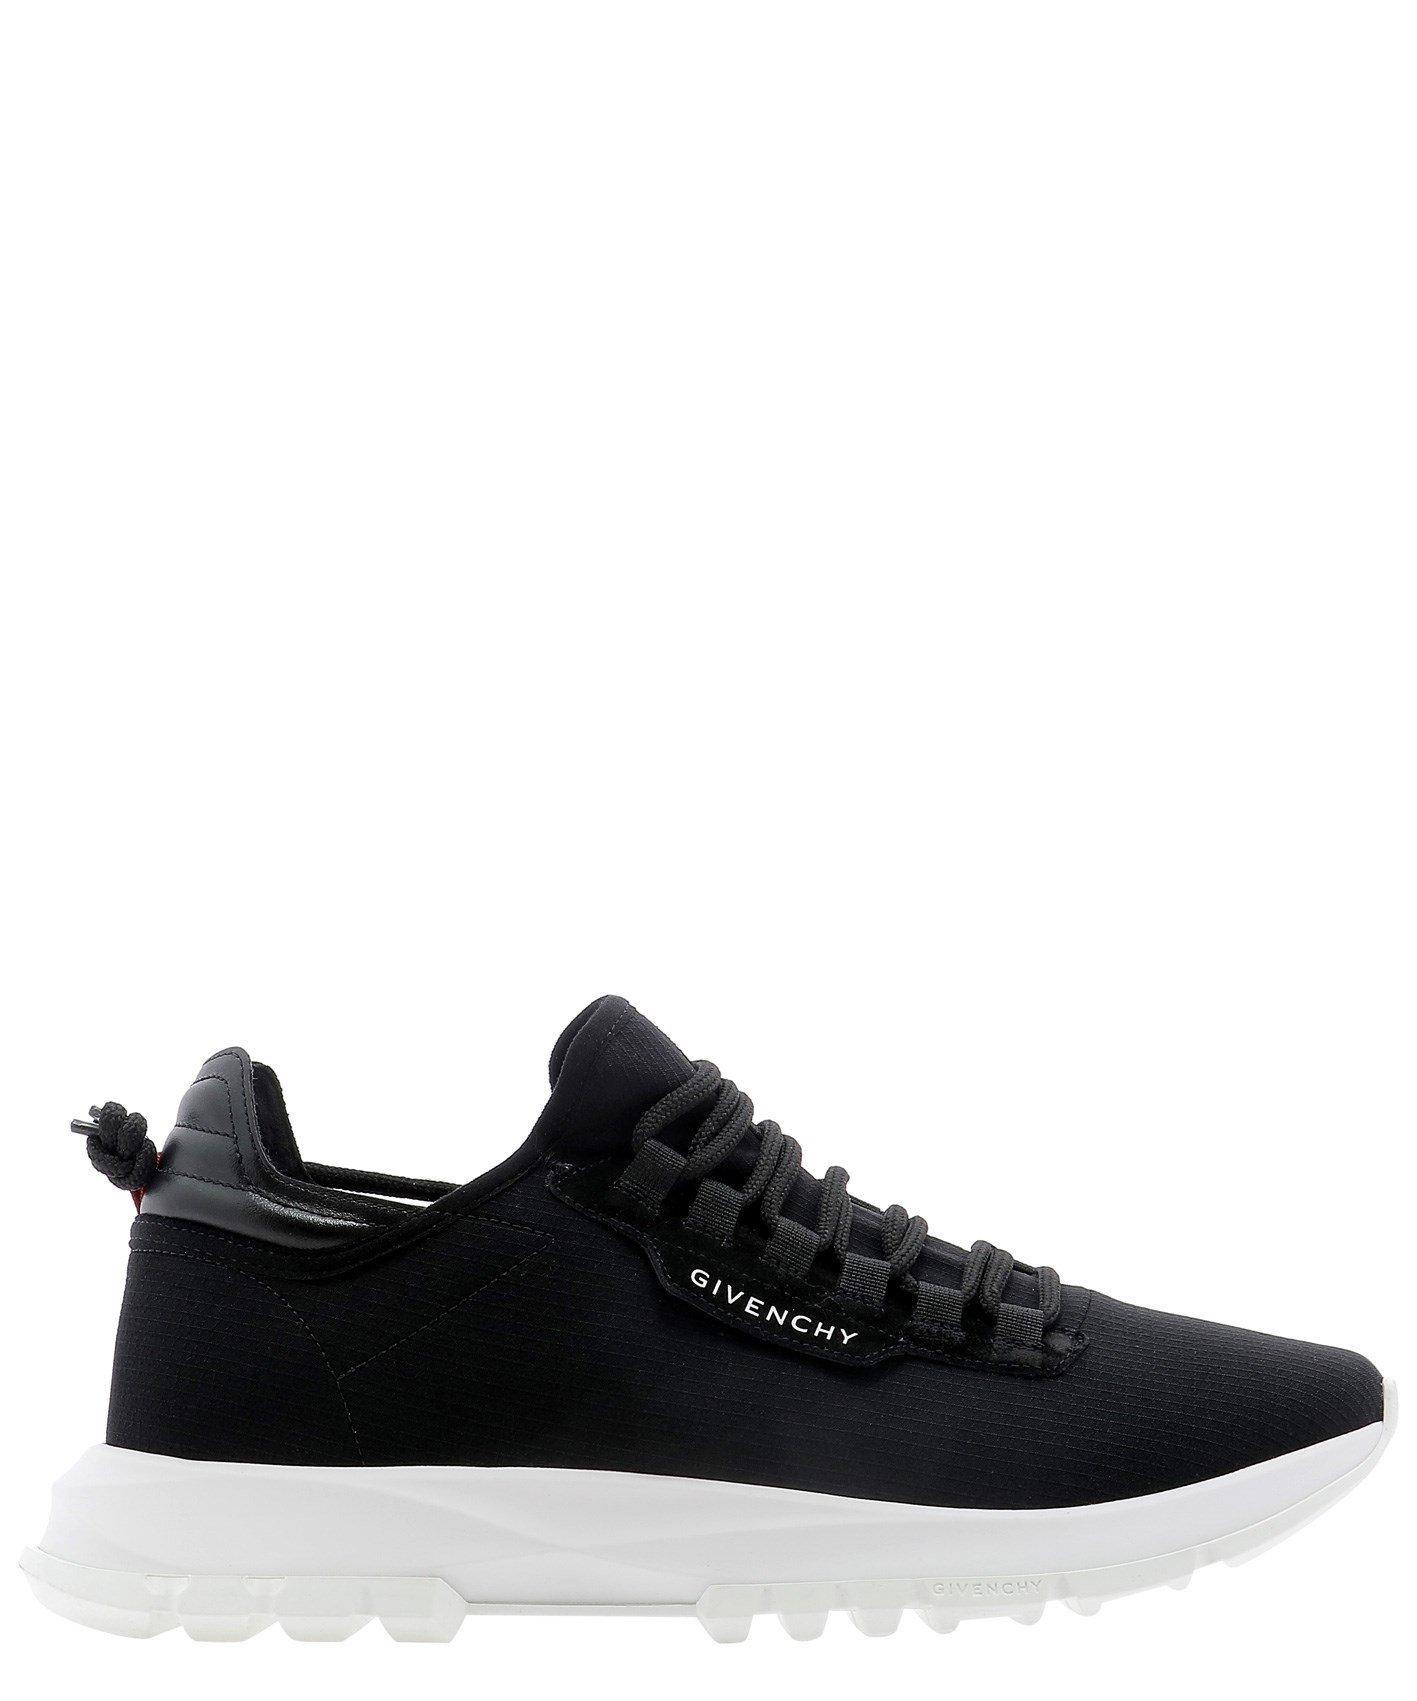 Givenchy Black Spectre Runner Sneakers for Men - Save 57% - Lyst